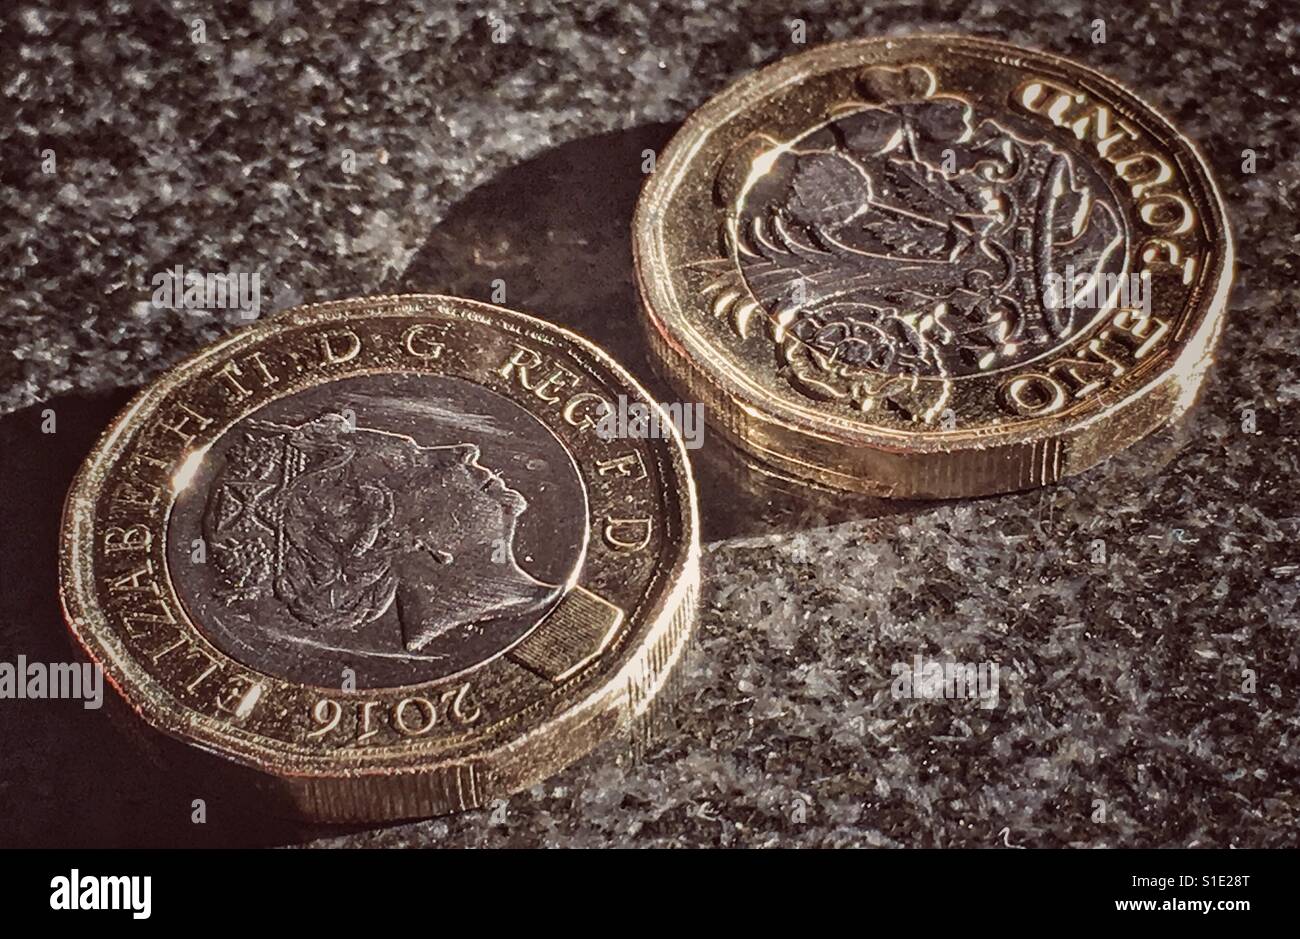 Two new British £1 coins, minted in 2016, released in 2017 Stock Photo